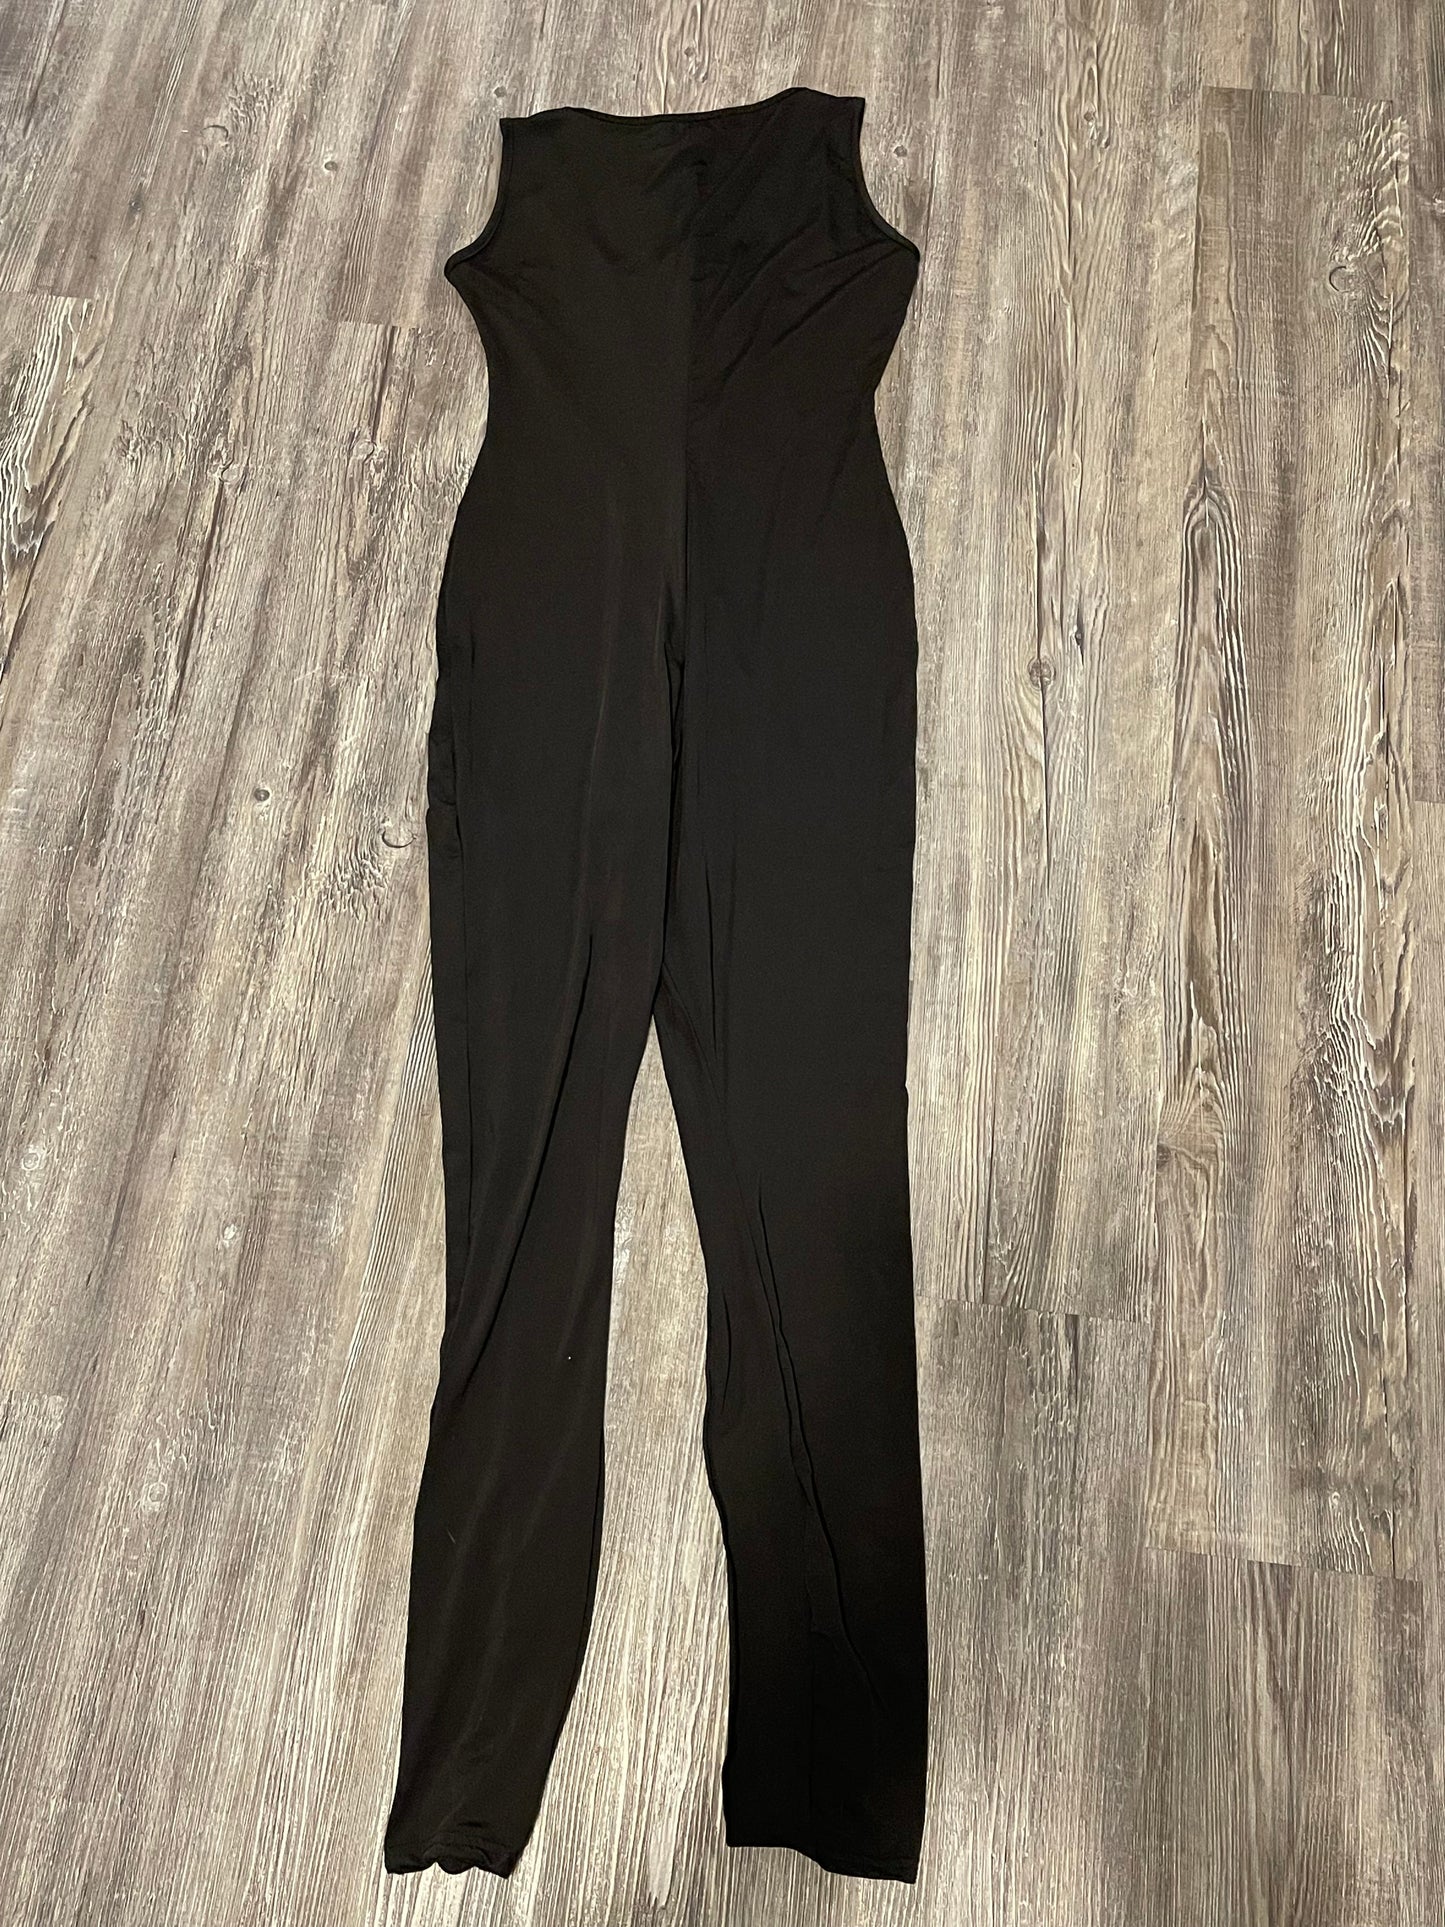 Jumpsuit By Pretty Little Thing  Size: M